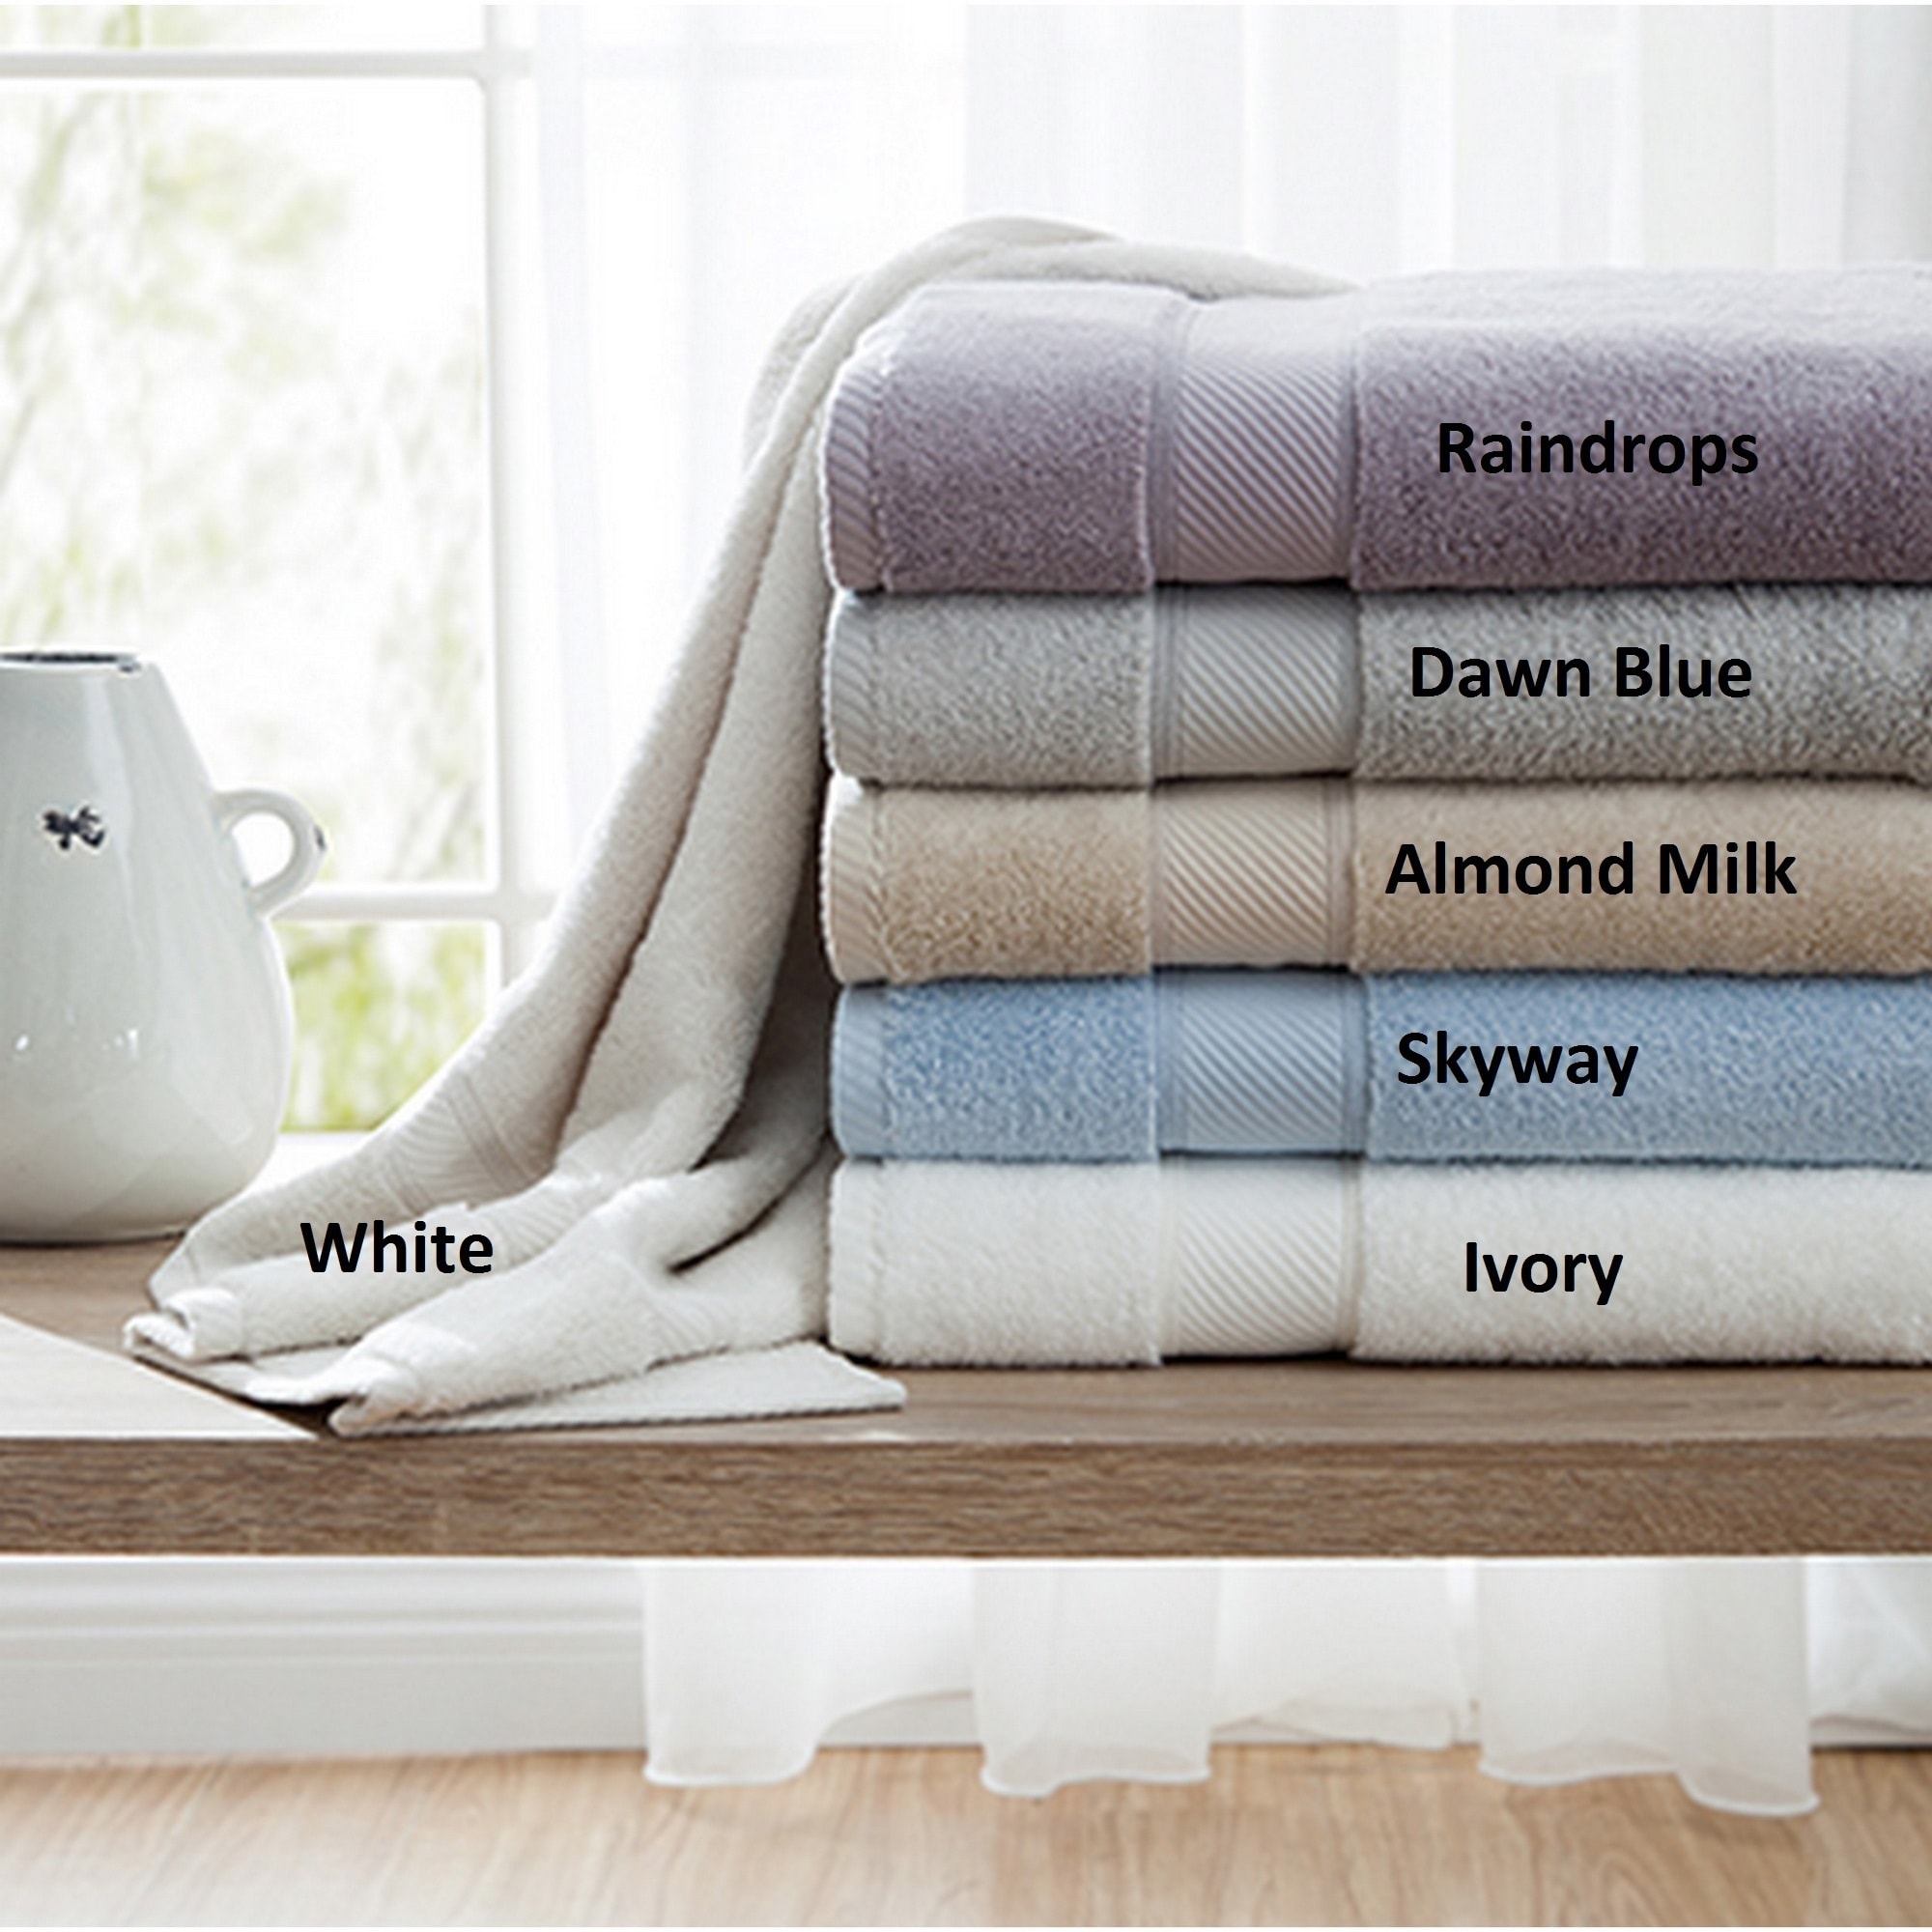 https://ak1.ostkcdn.com/images/products/17982488/Charisma-Classic-II-Towel-Collection-Bath-Hand-Wash-Towel-Sold-Seperately-eb649670-48a0-4c2c-b644-01106cba0d5c.jpg